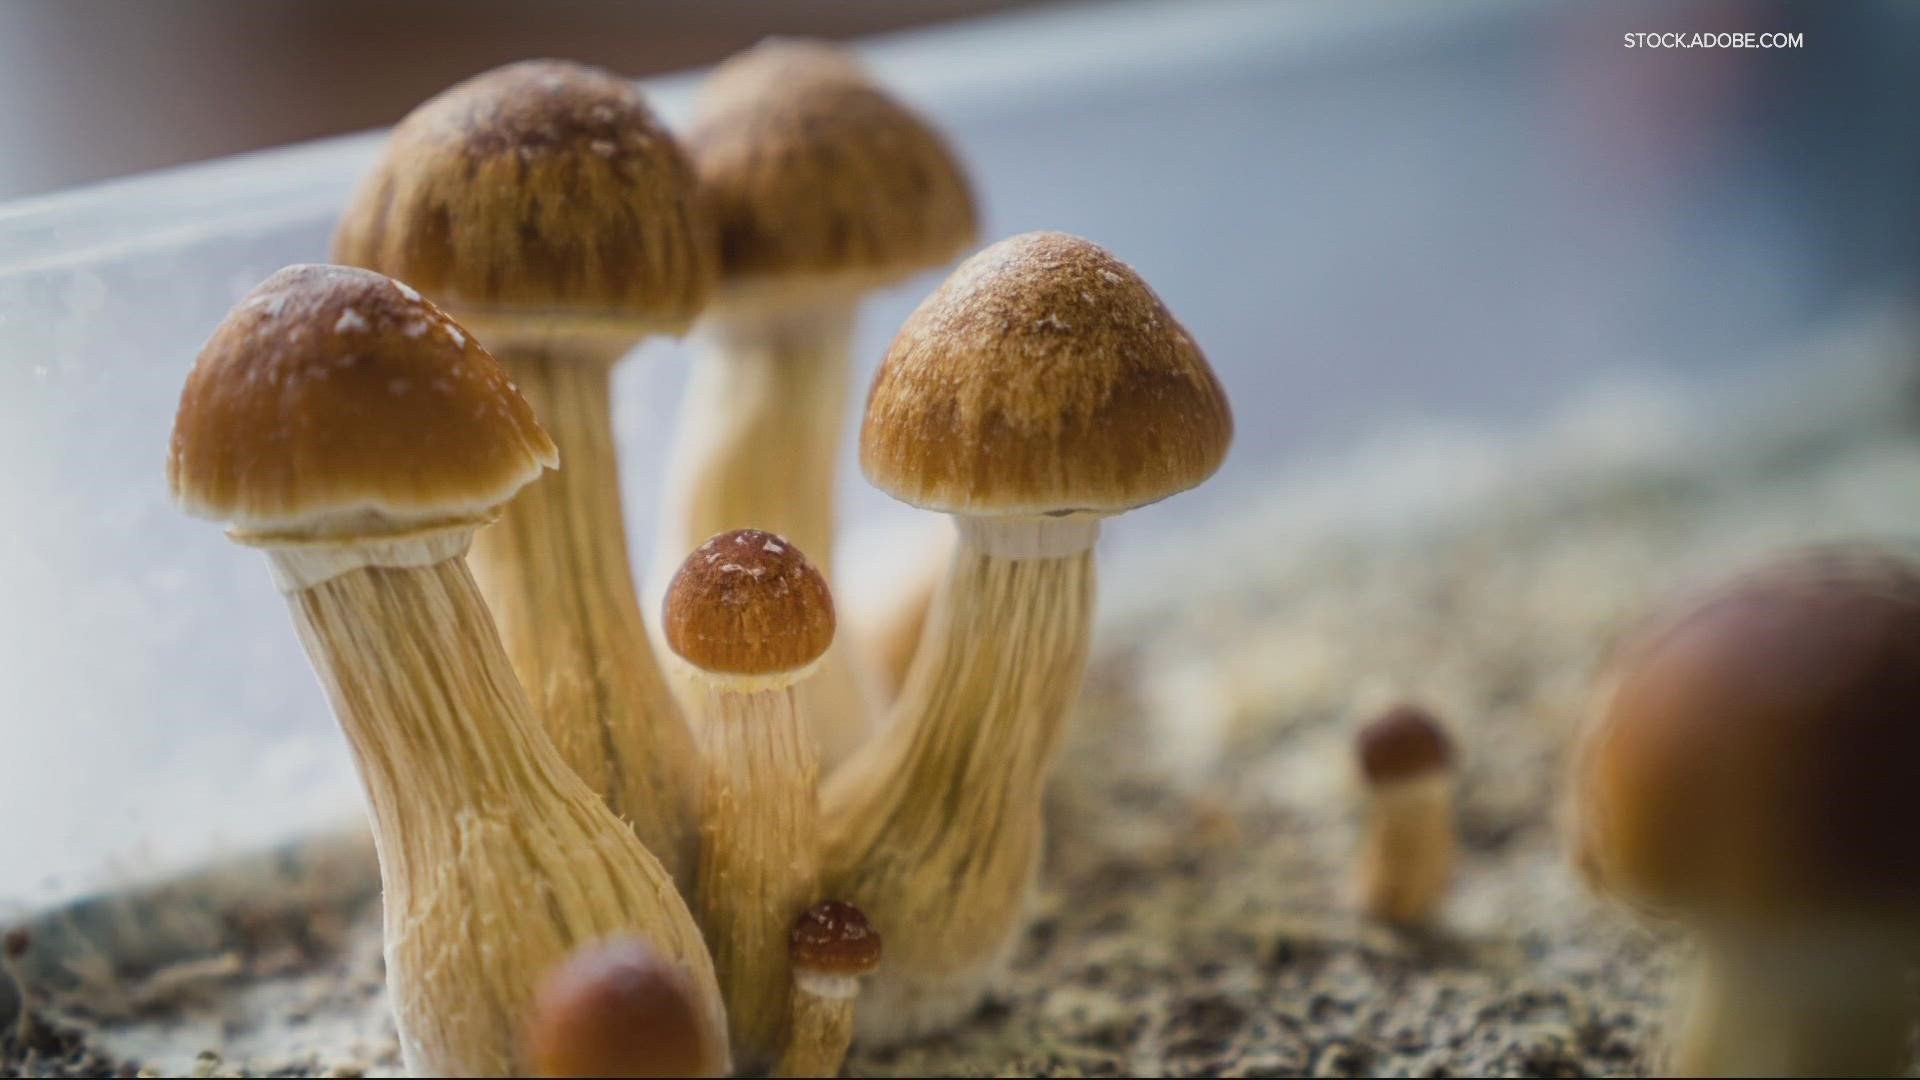 Oregon Psilocybin Services to finalize rules in December 2022